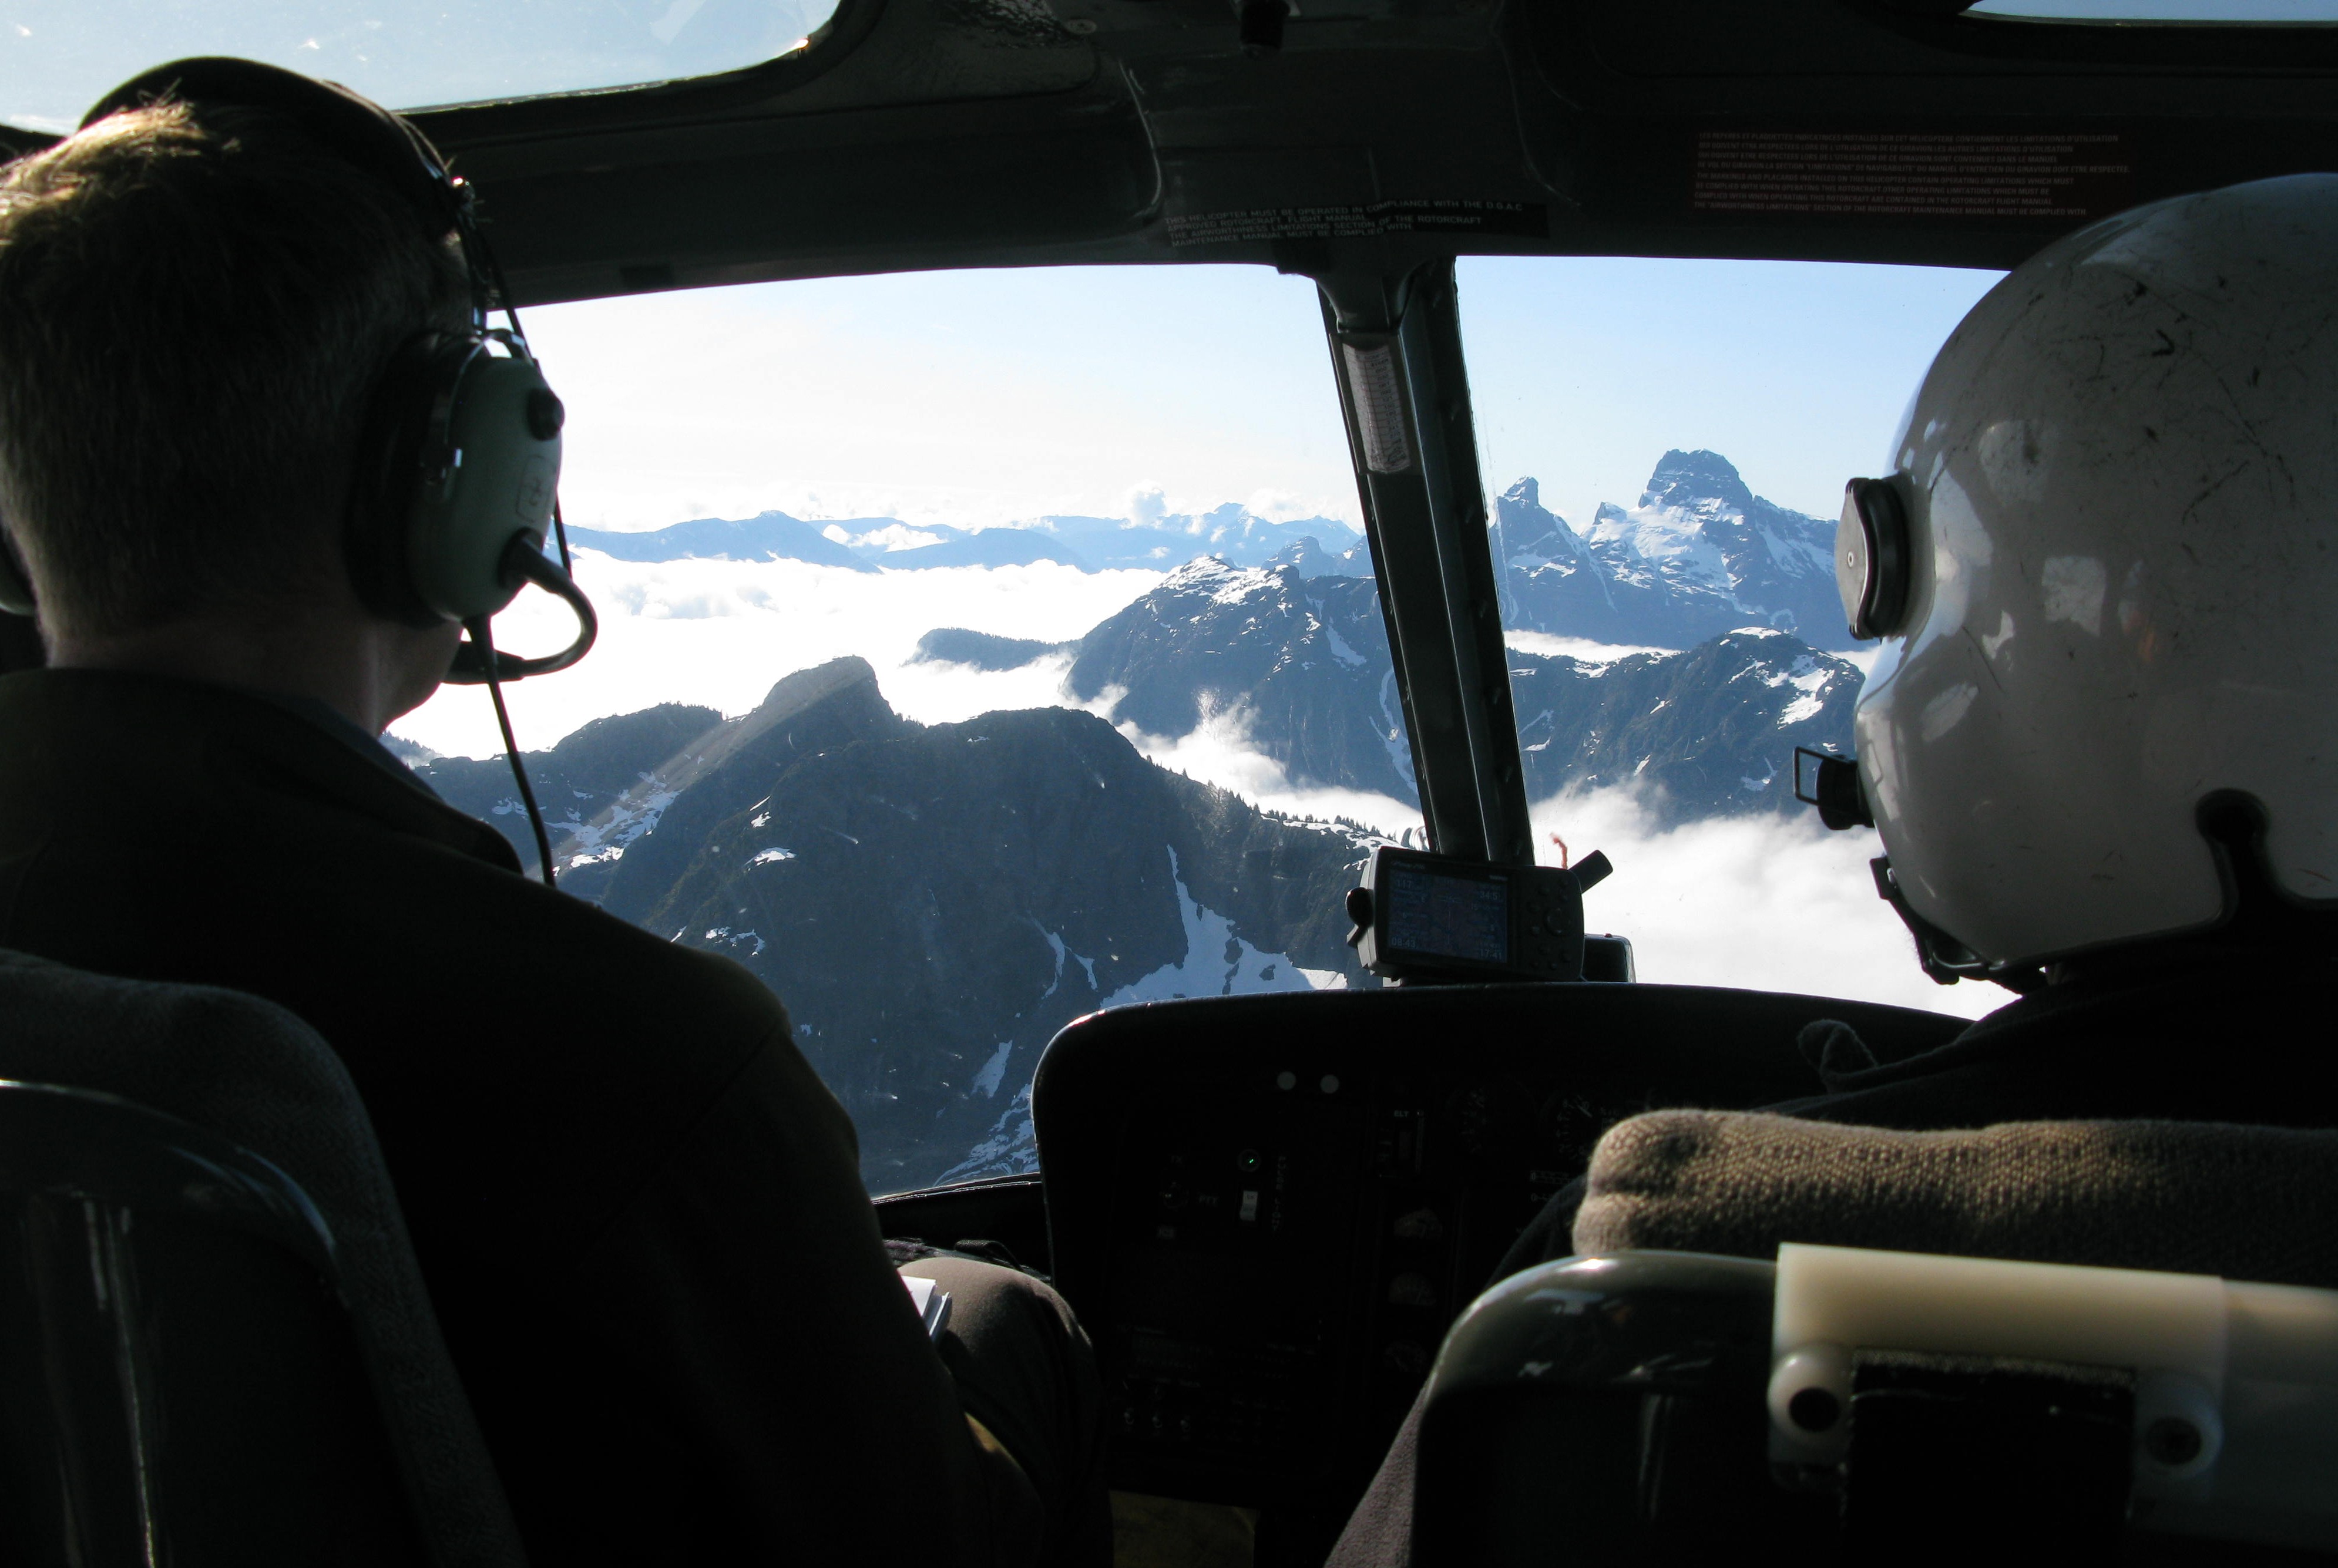 Marmot surveys – by helicopter